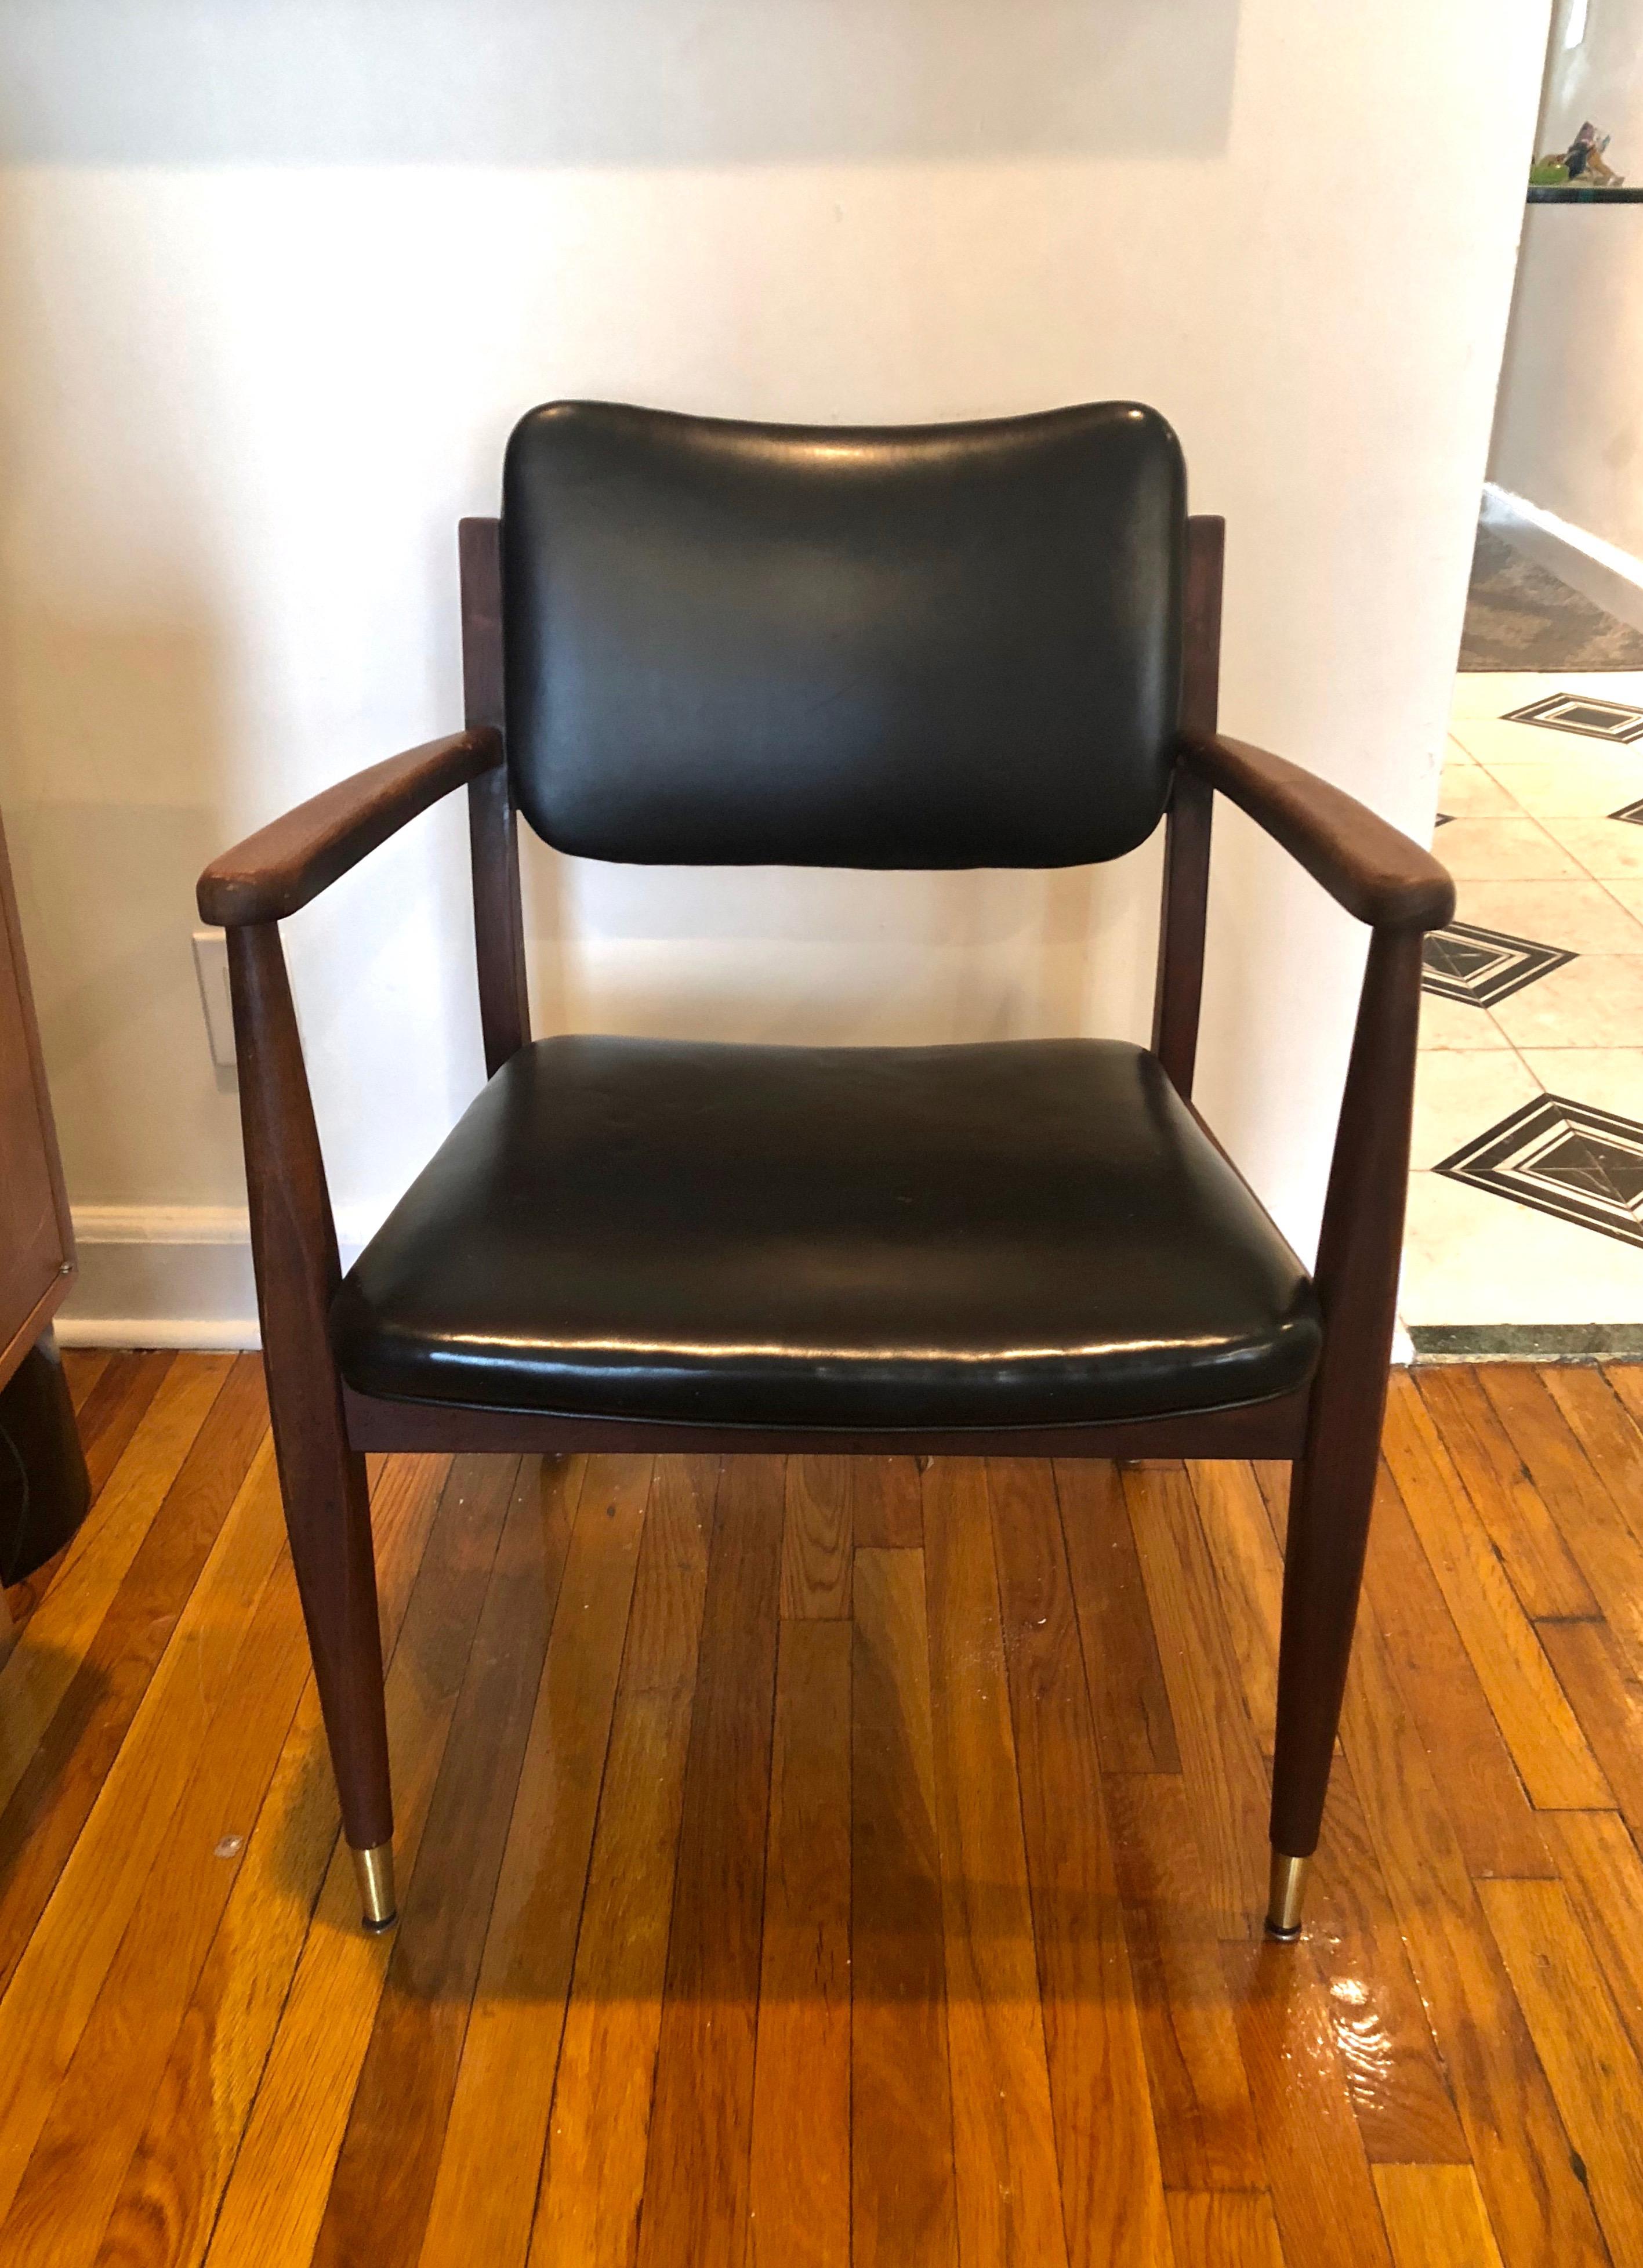 Pair of wooden framed lounge or desk armchairs with black leatherette cushions, brass sabots on the front tapering legs, and curved arms. Arm height is 26.75 inches.